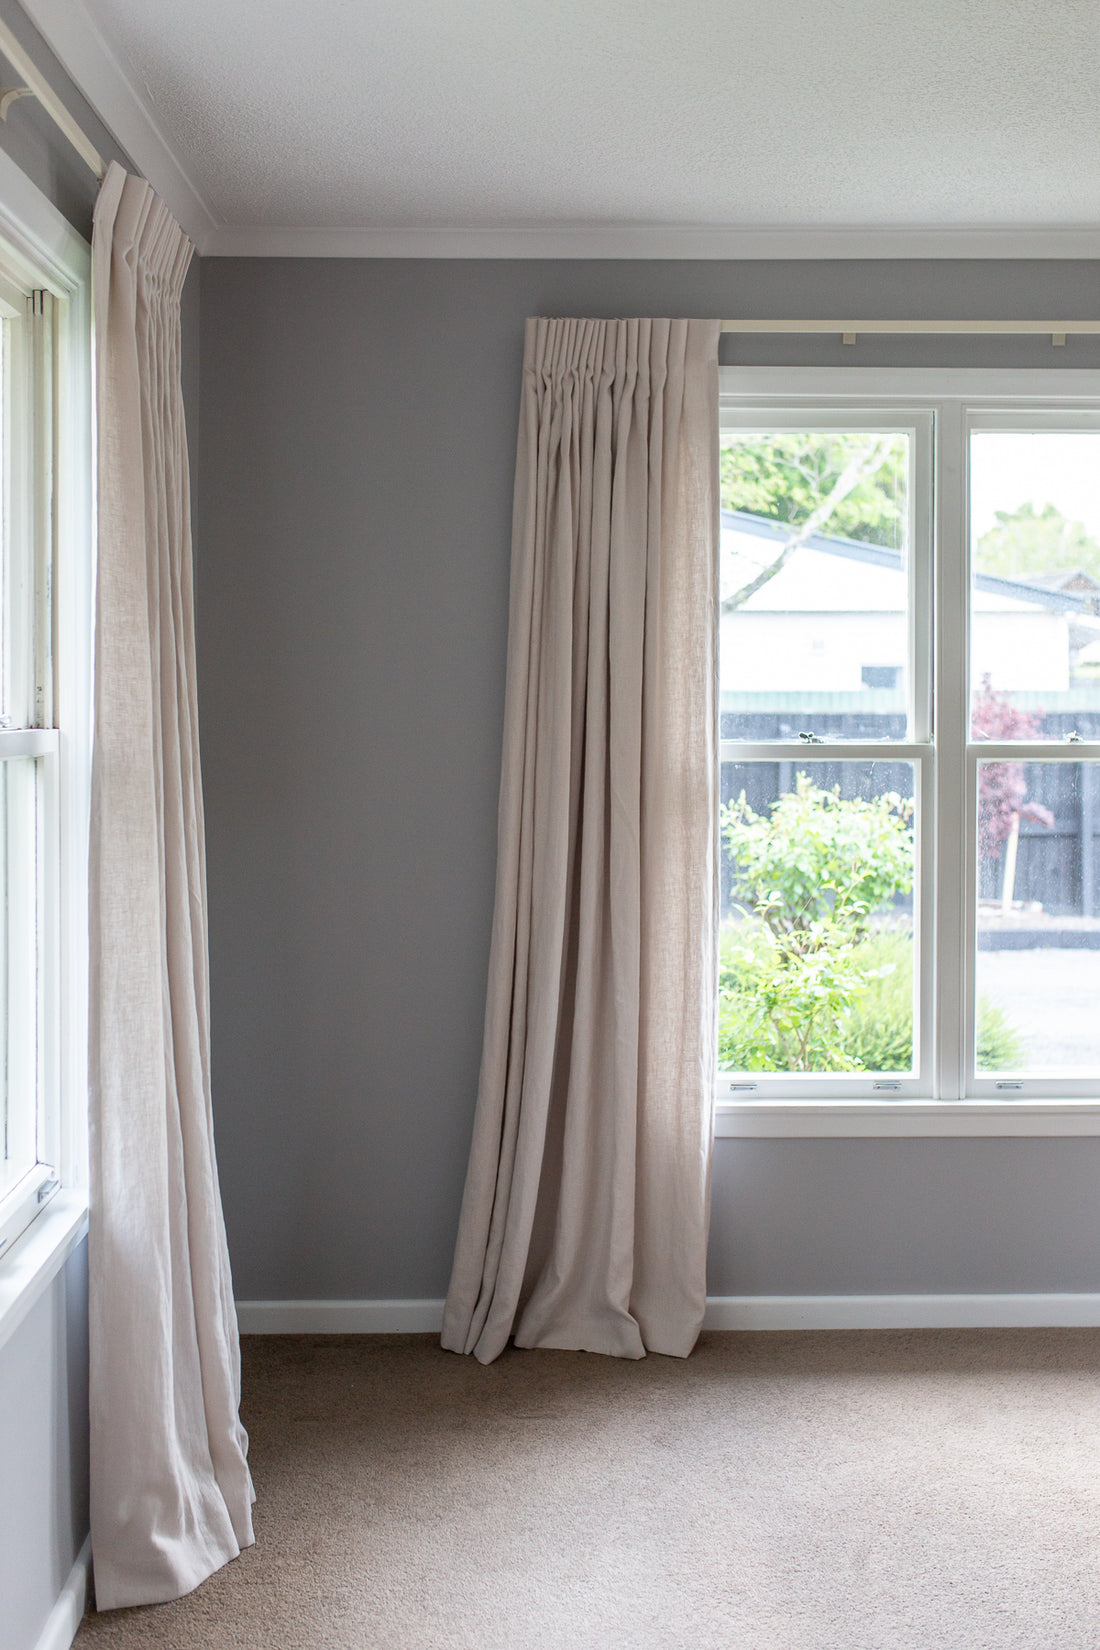 Measure up for Curtains - A Step by Step Guide